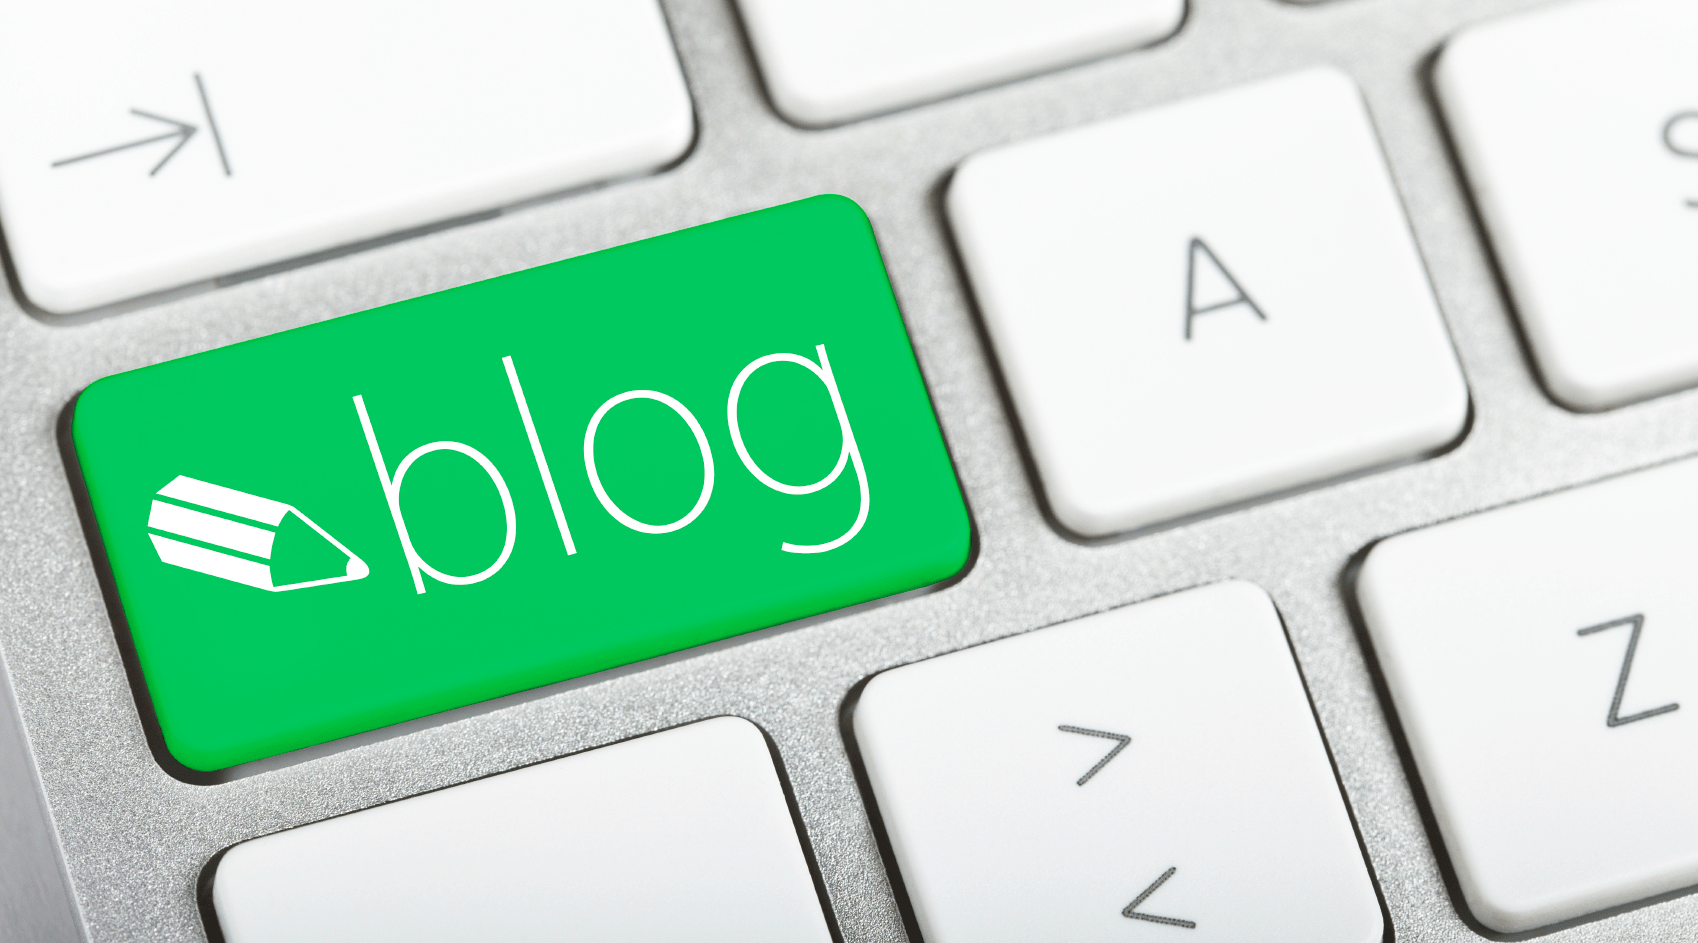 Welcome to the brand-new ReMaTec blog